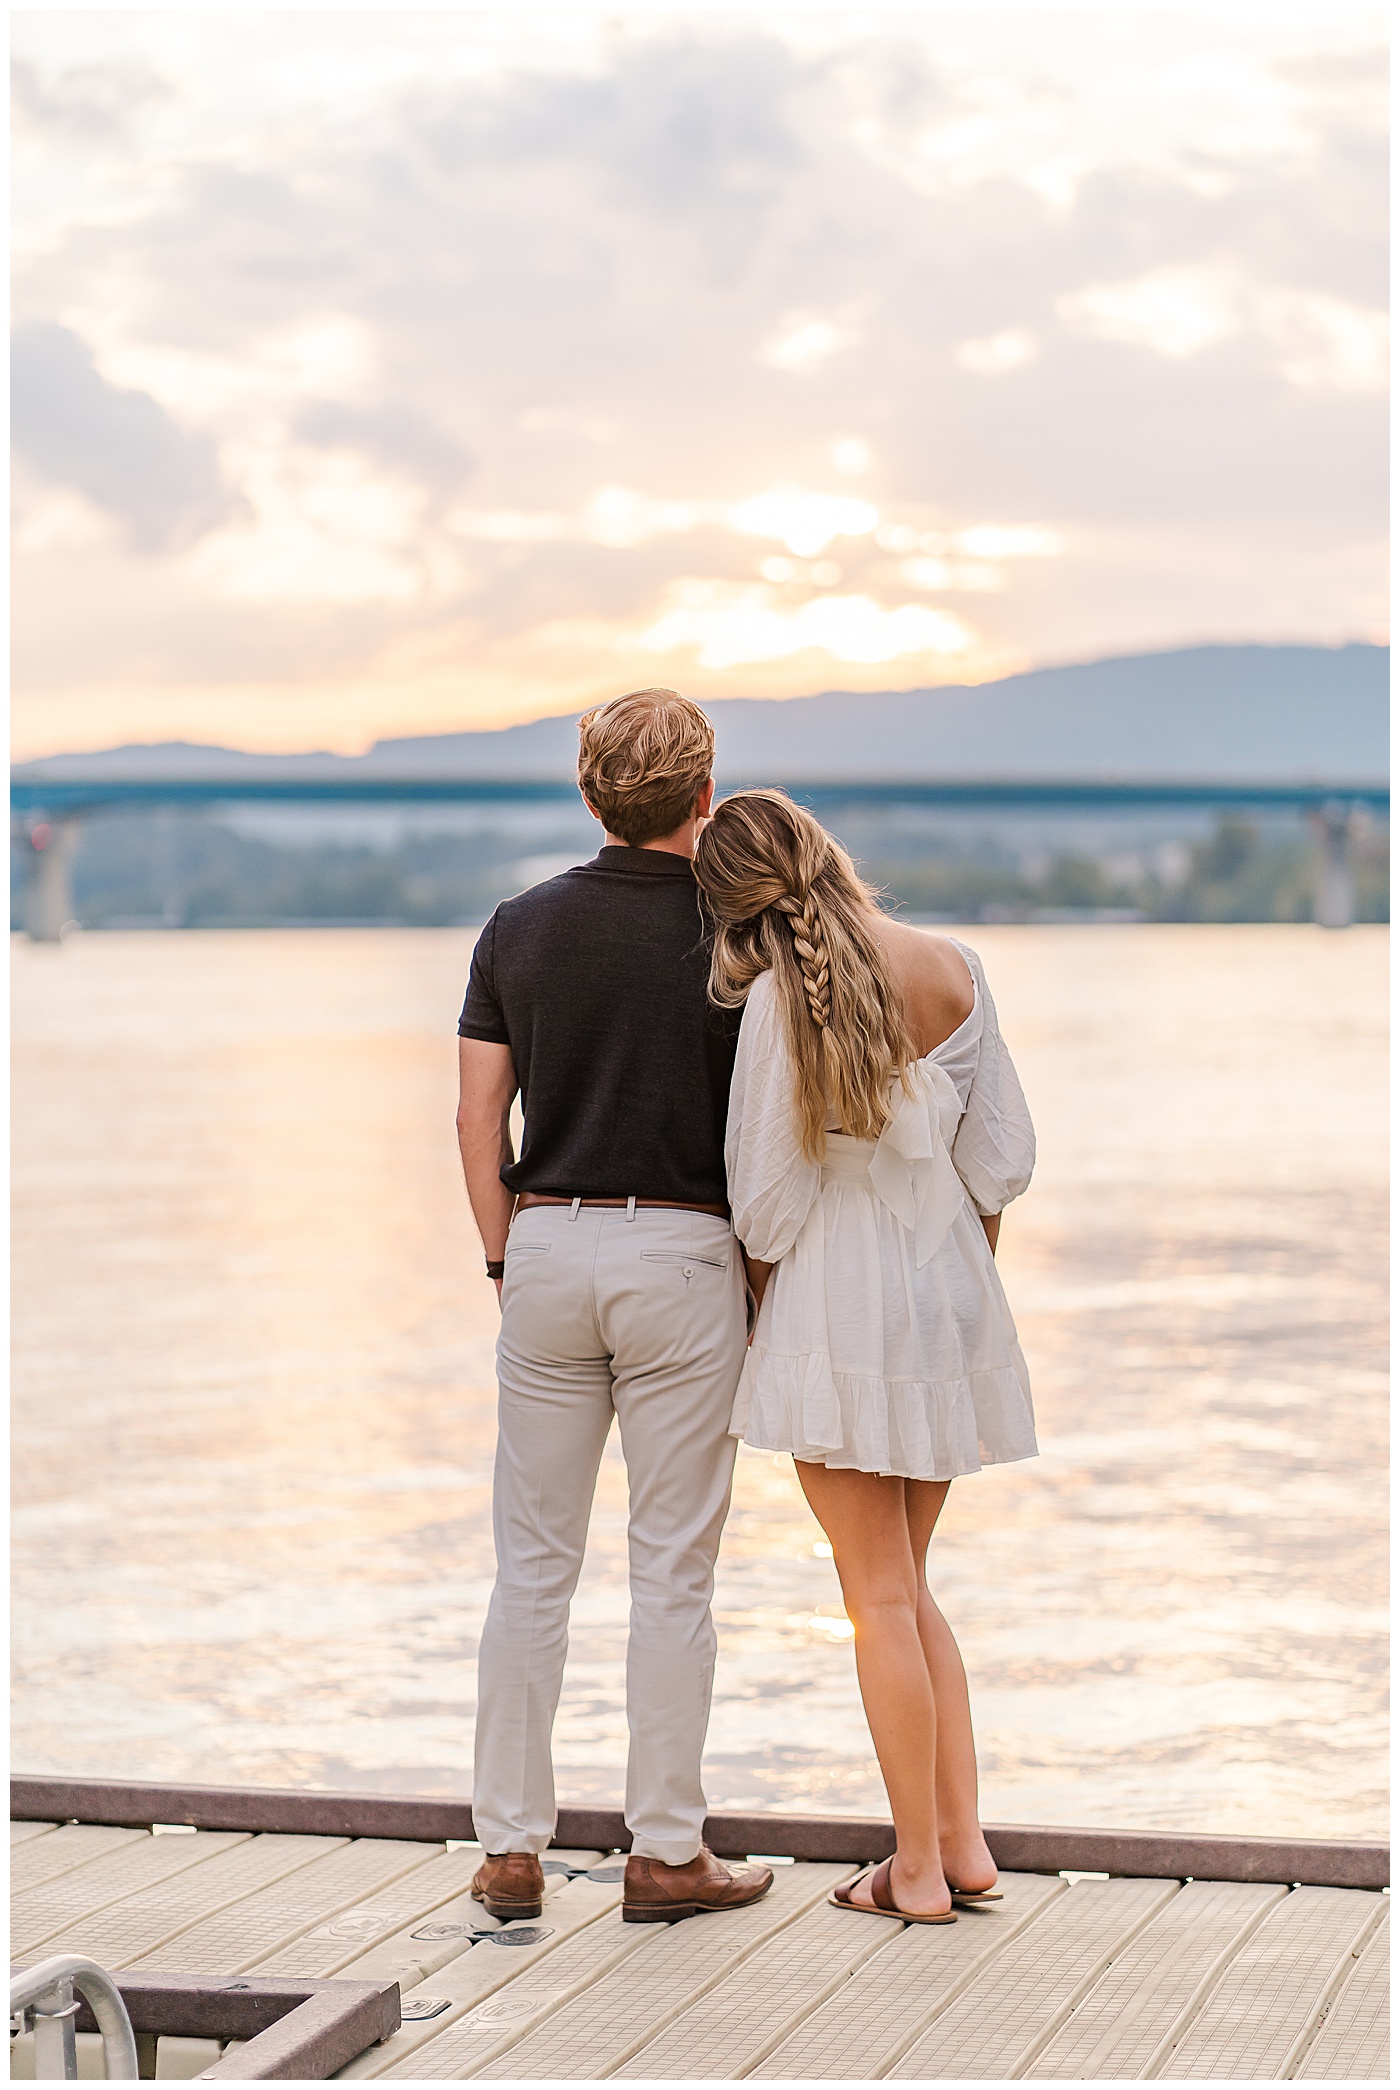 Downtown Chattanooga TN River Engagement Photos Sunset